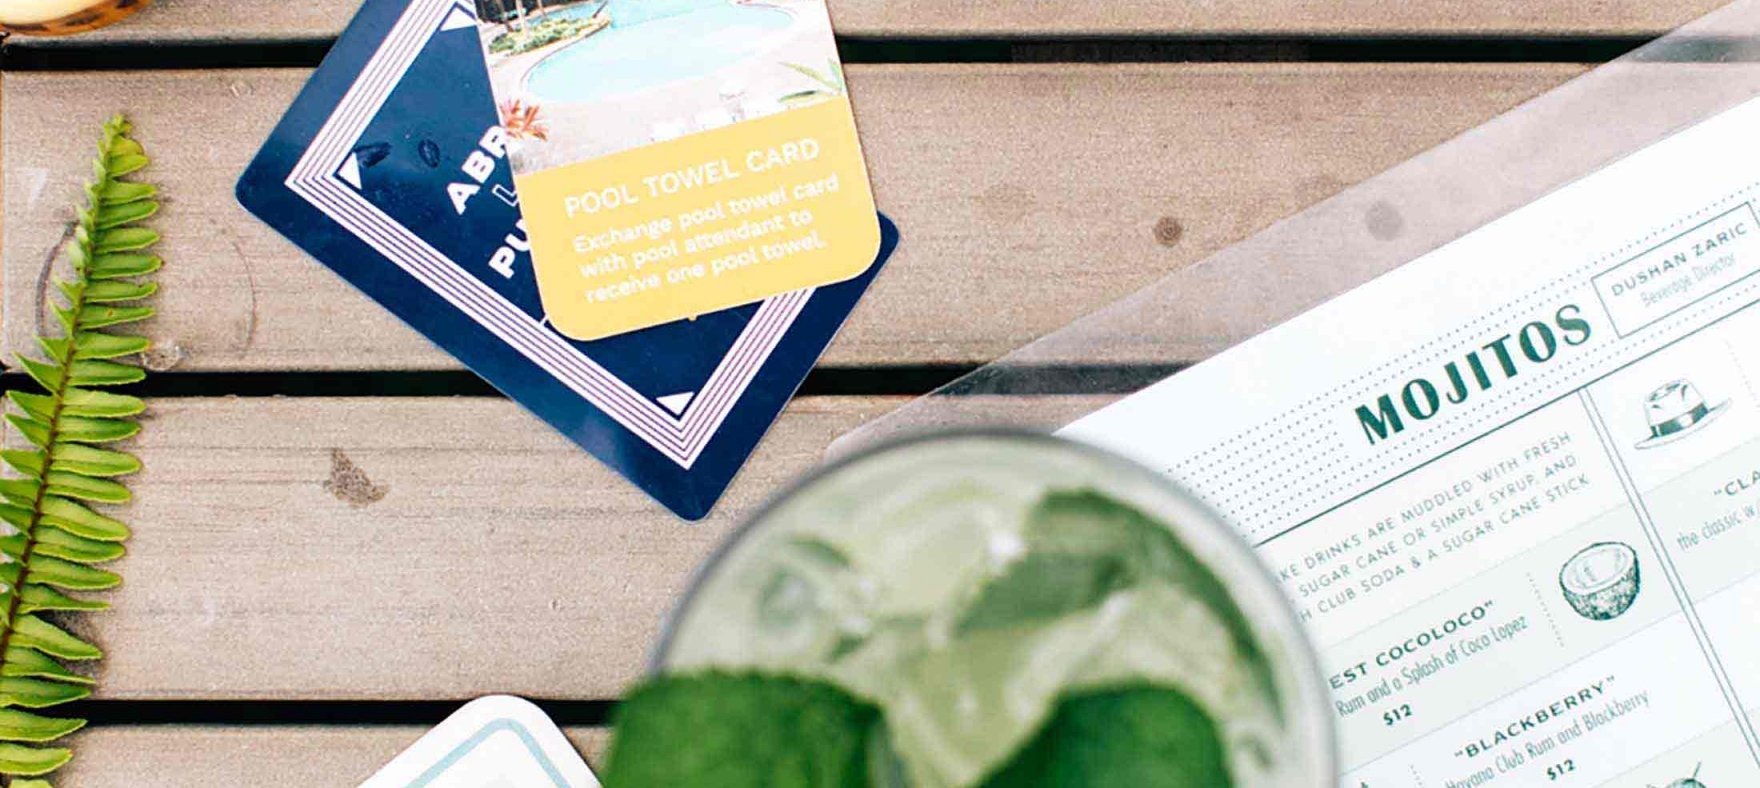 A top shot of a mojito sitting on top of a menu on a wooden table with collectable cards and a glass of Pina Colada.